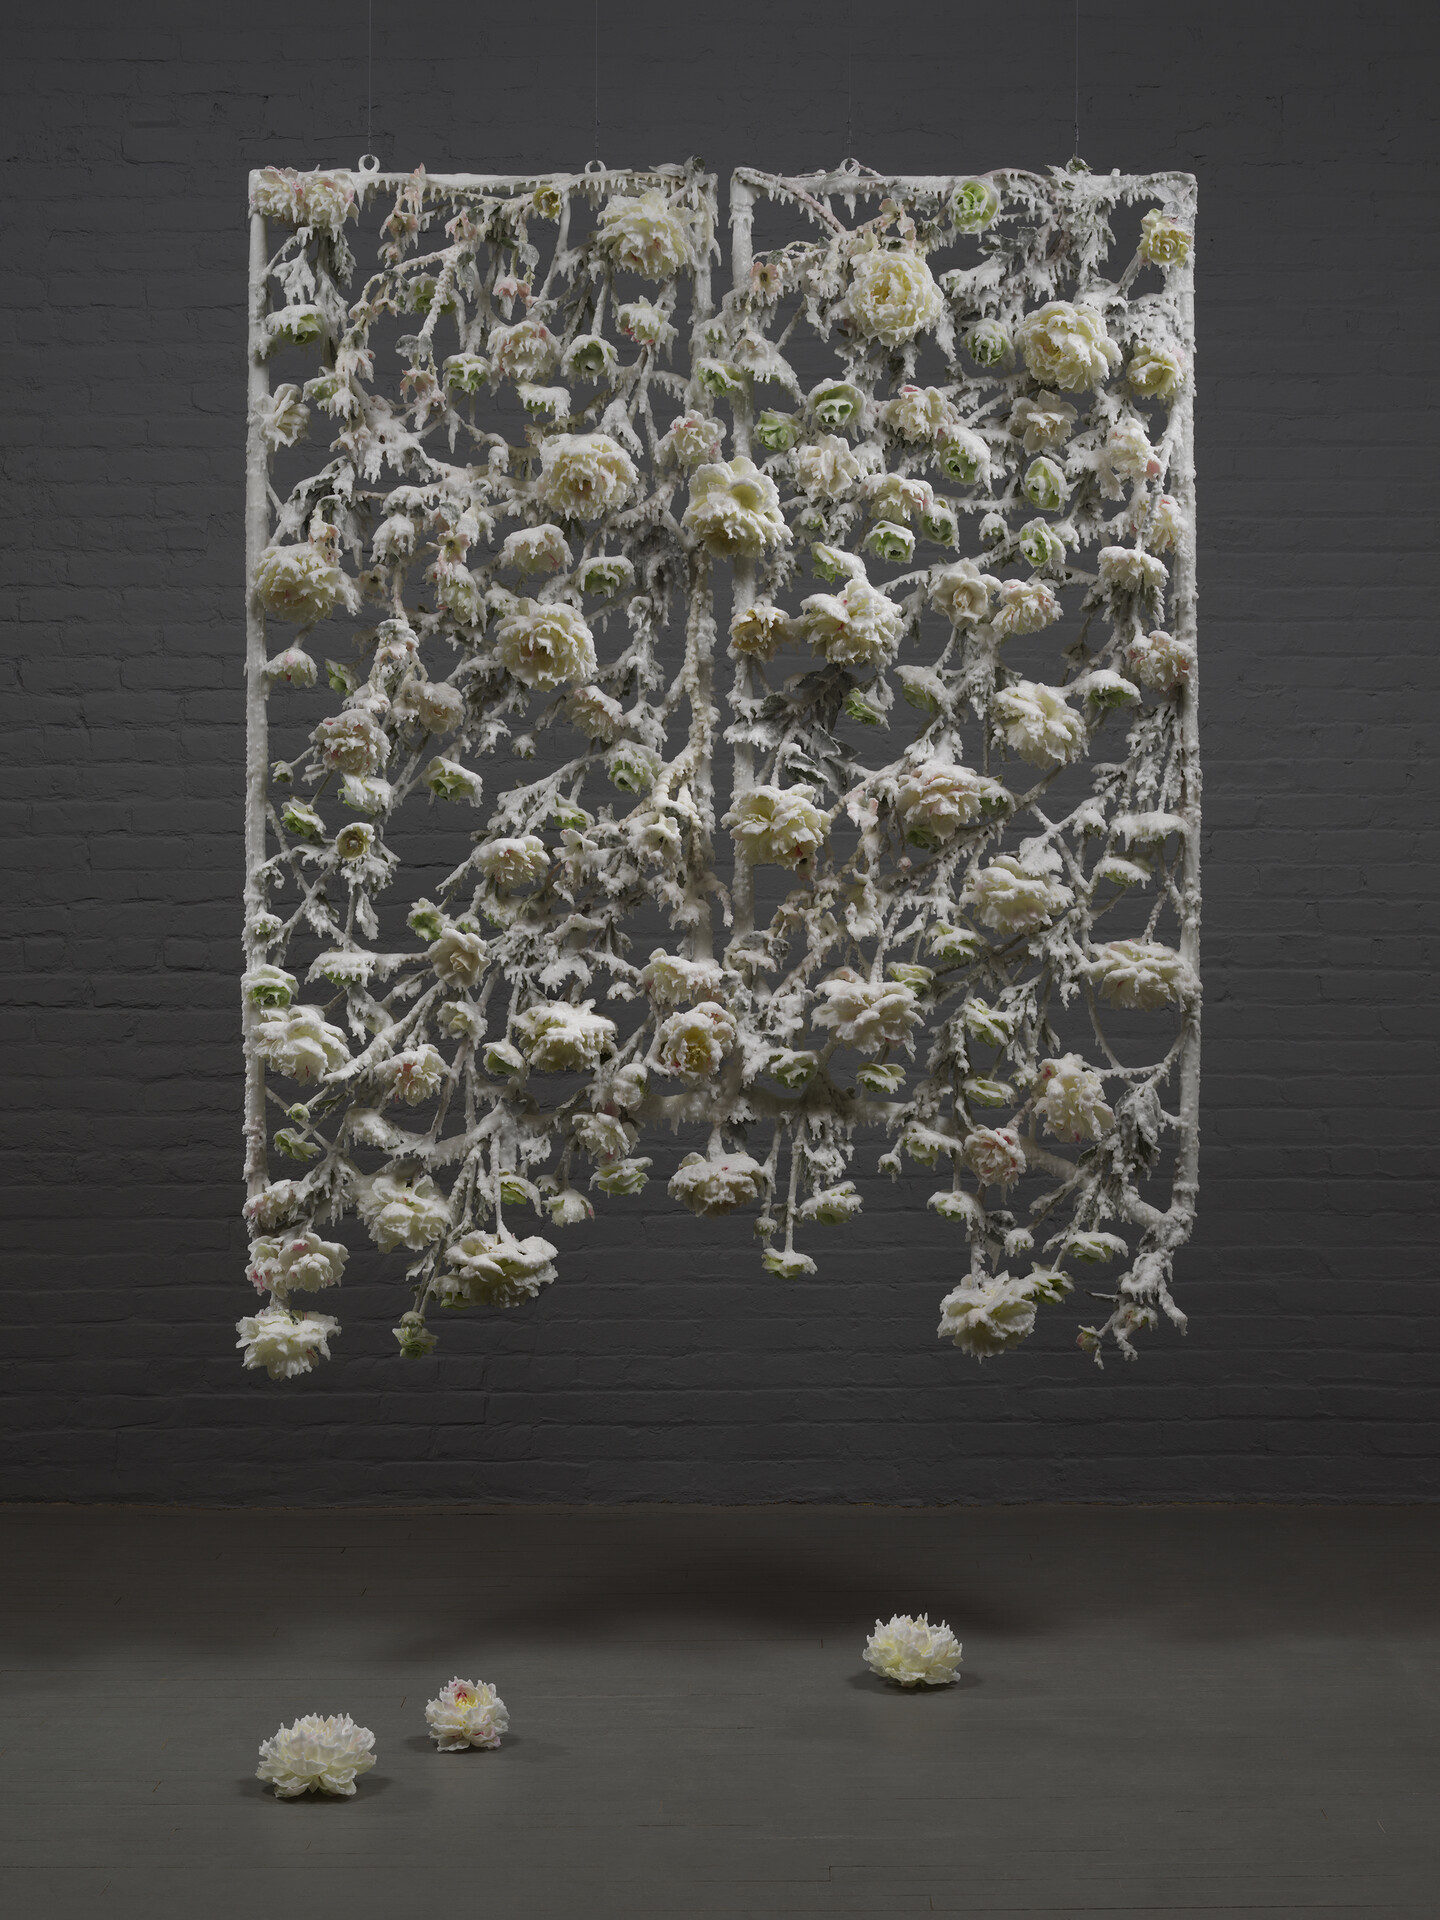 A sculpture suspended from the ceiling made of wax-covered silk flowers hanging within a rectangular steel frame. Hardened white wax coats and drips down all surfaces of the sculpture against a dark grey background.